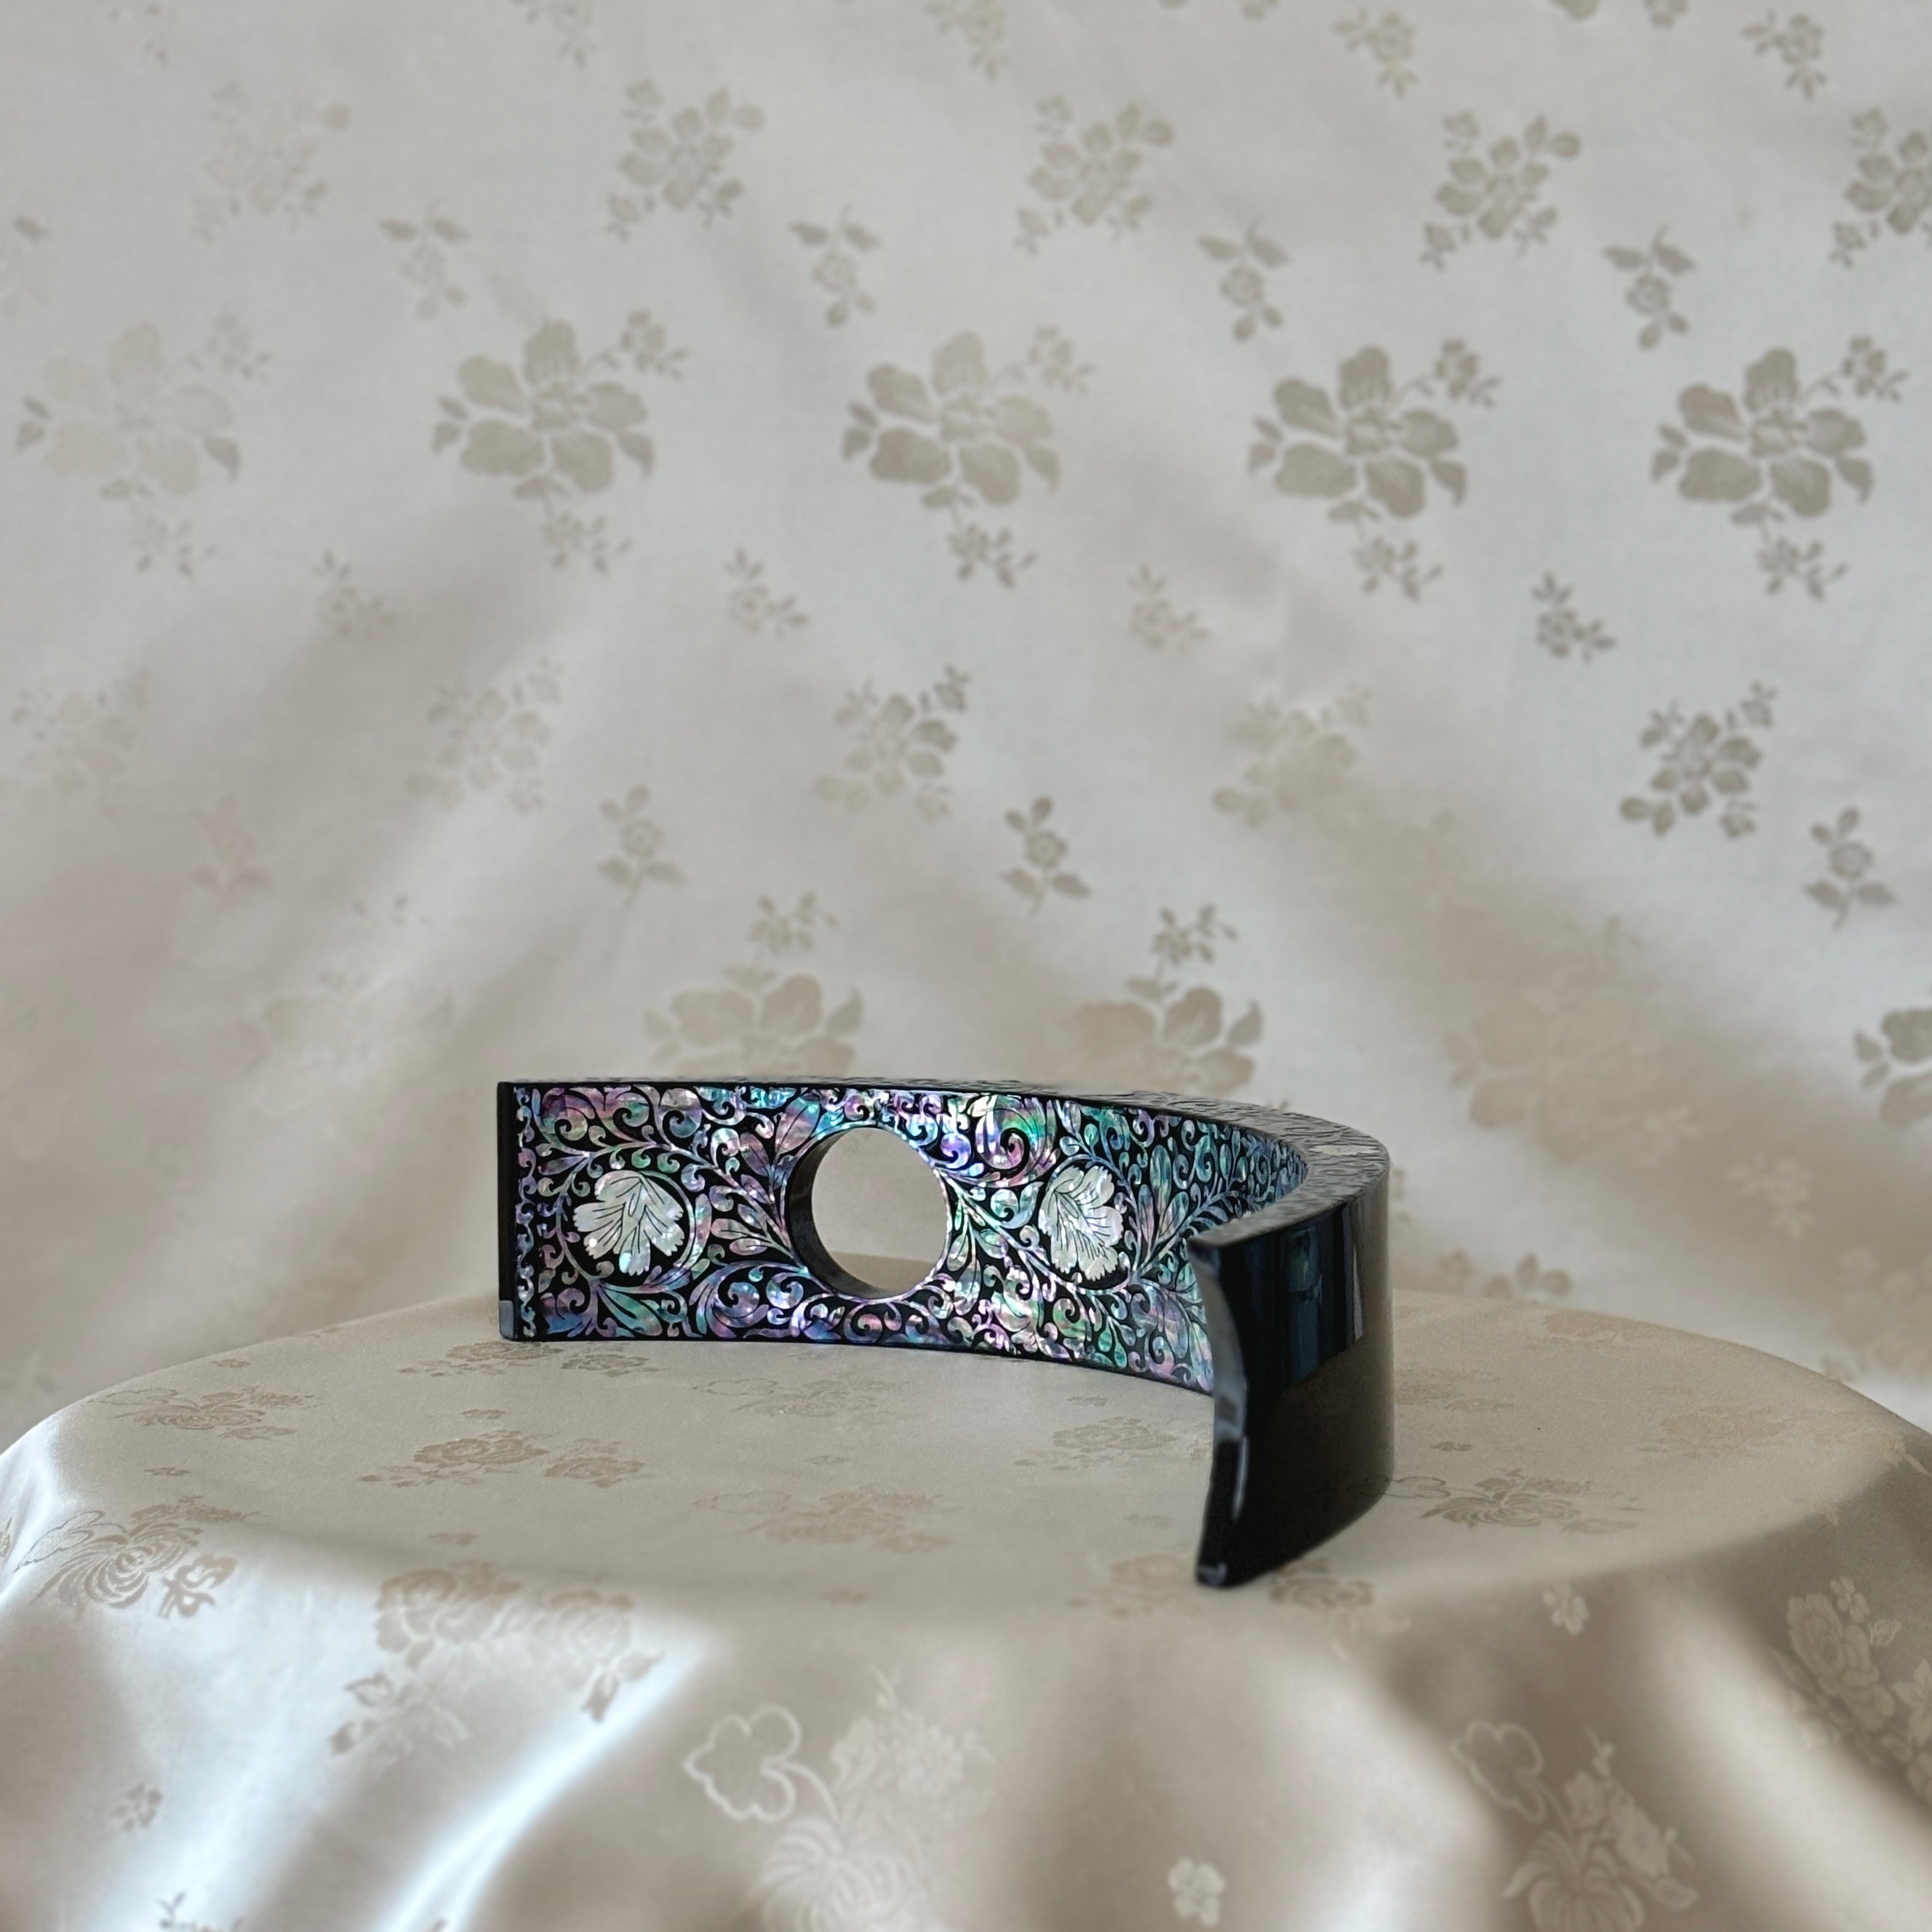 Upper view of a luxurious Korean traditional handmade mother of pearl wine holder with a plum blossom pattern.